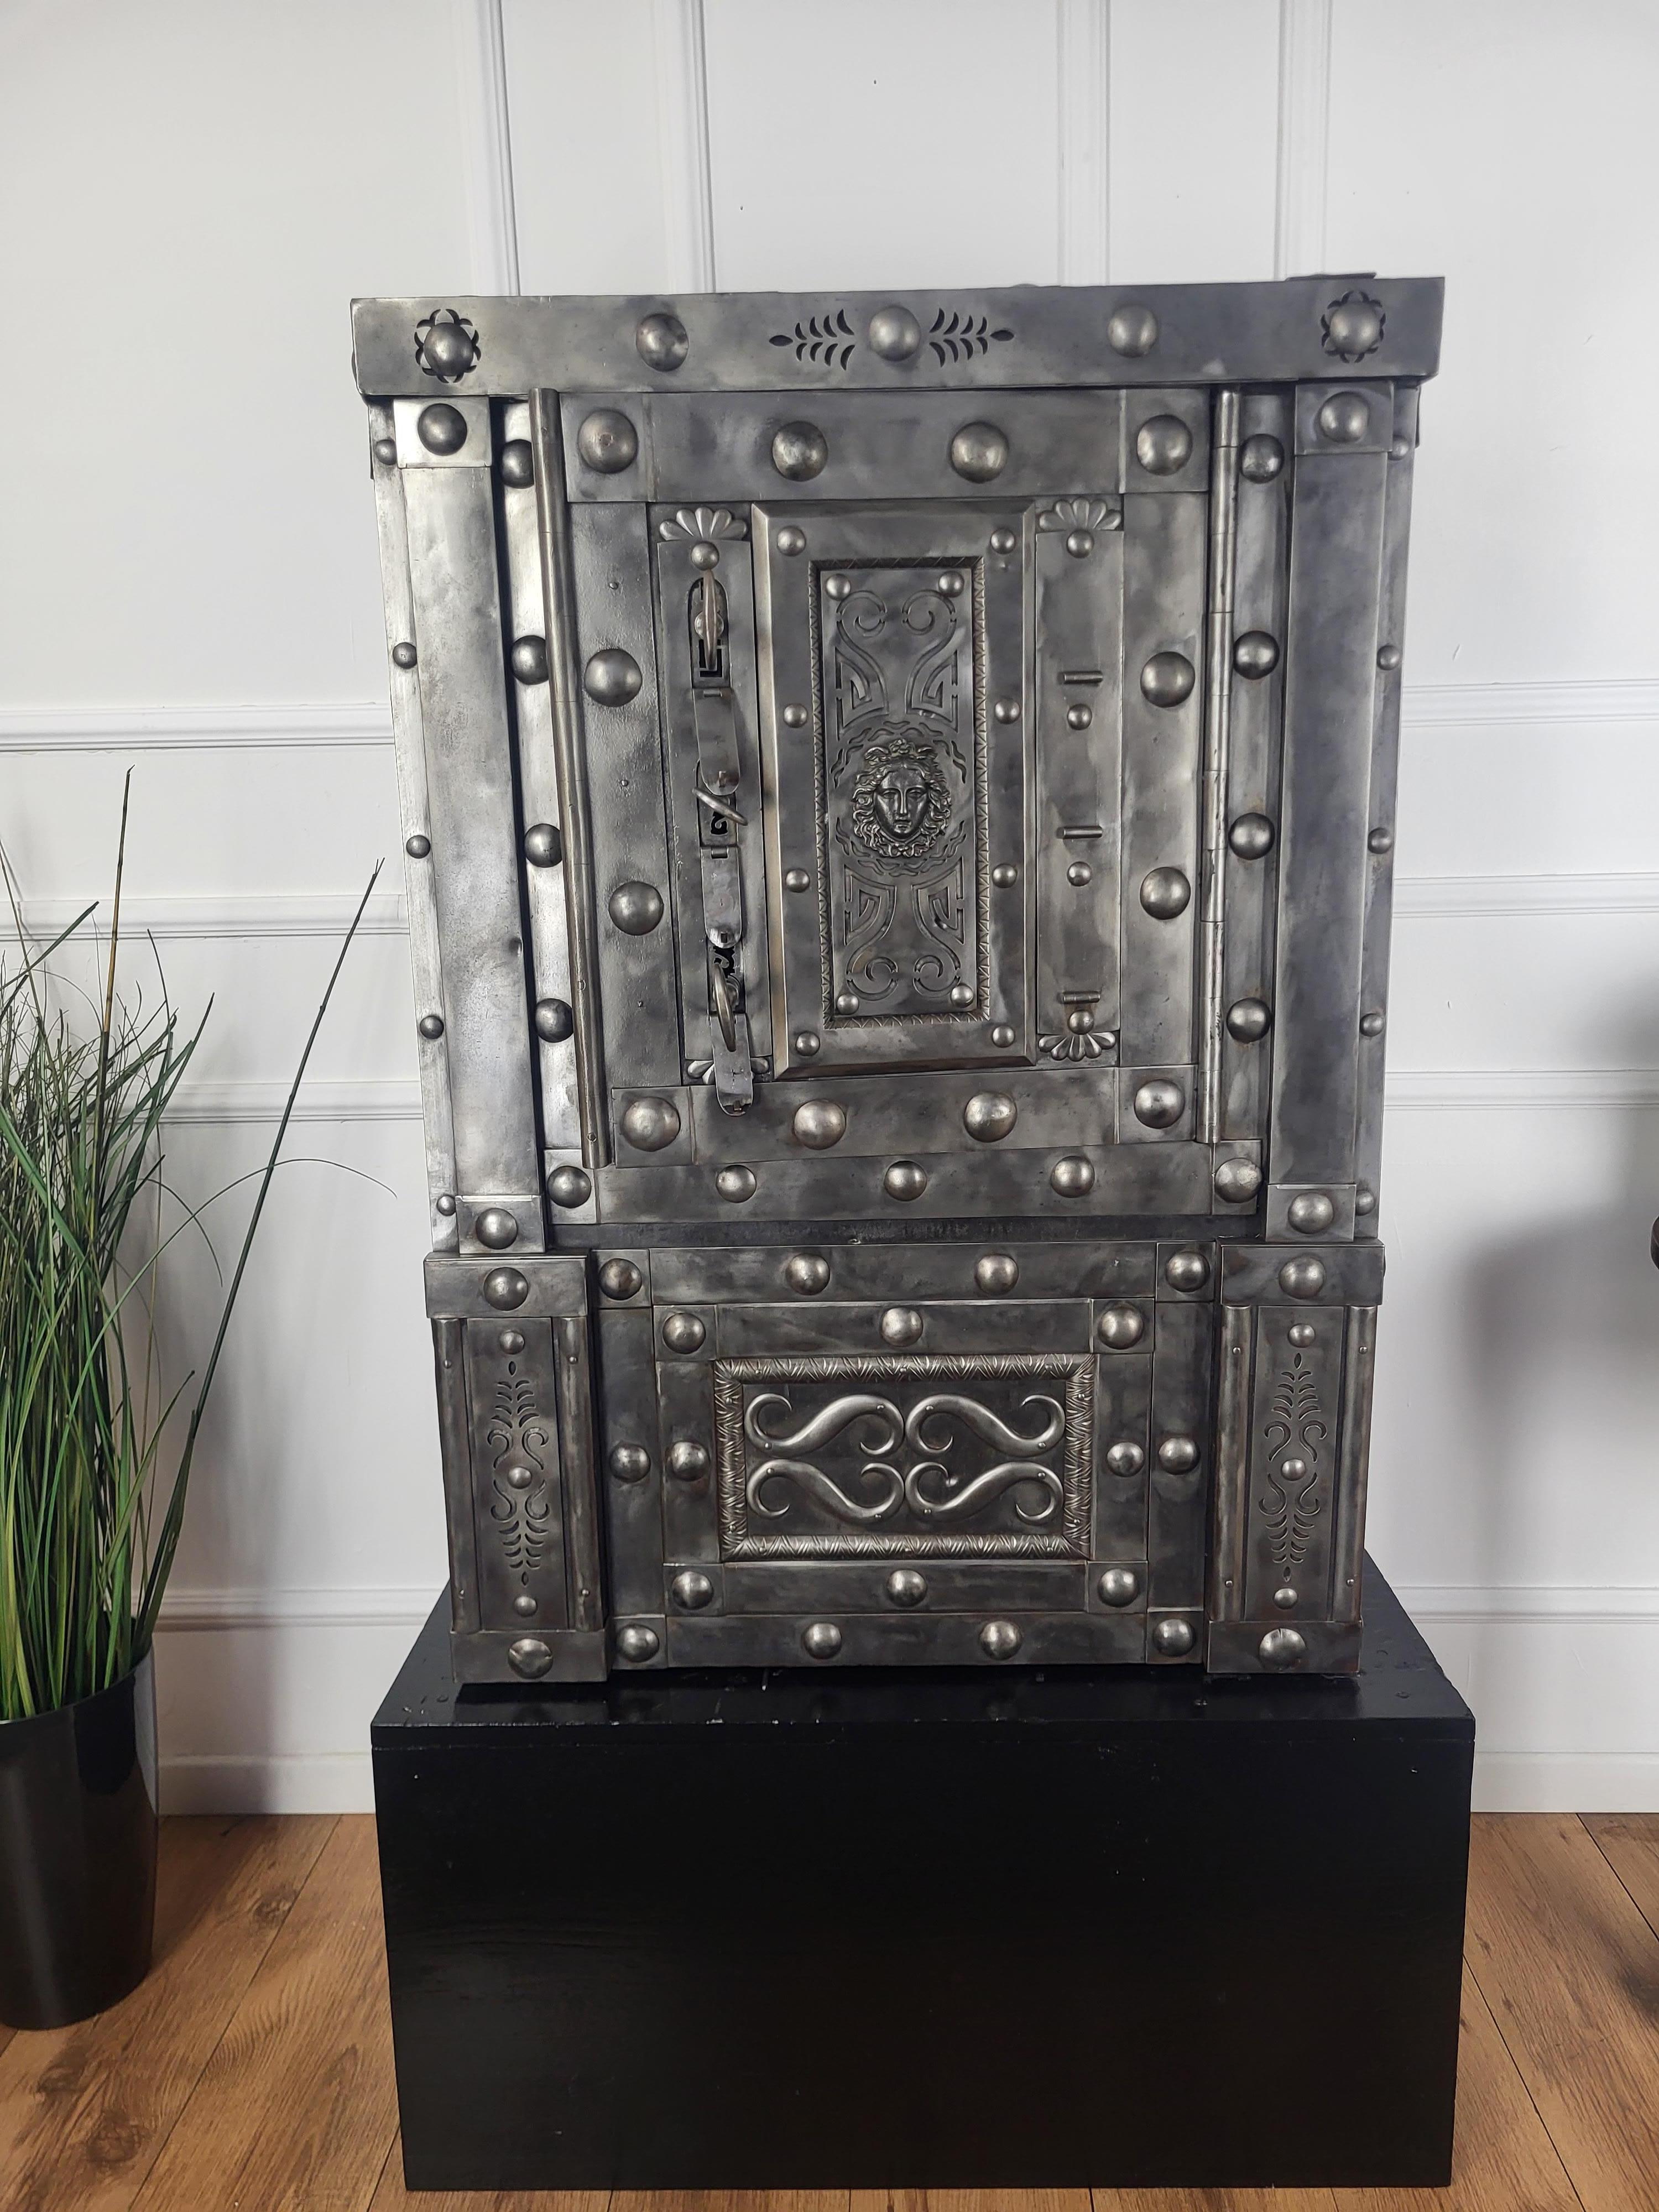 Beautiful and rare example of late 18th century Italian master blacksmith craftsmanship, this antique studded safe with typical all-around hobnails and great wrought iron details, is probably from the Piedmont region, has a great metal color with